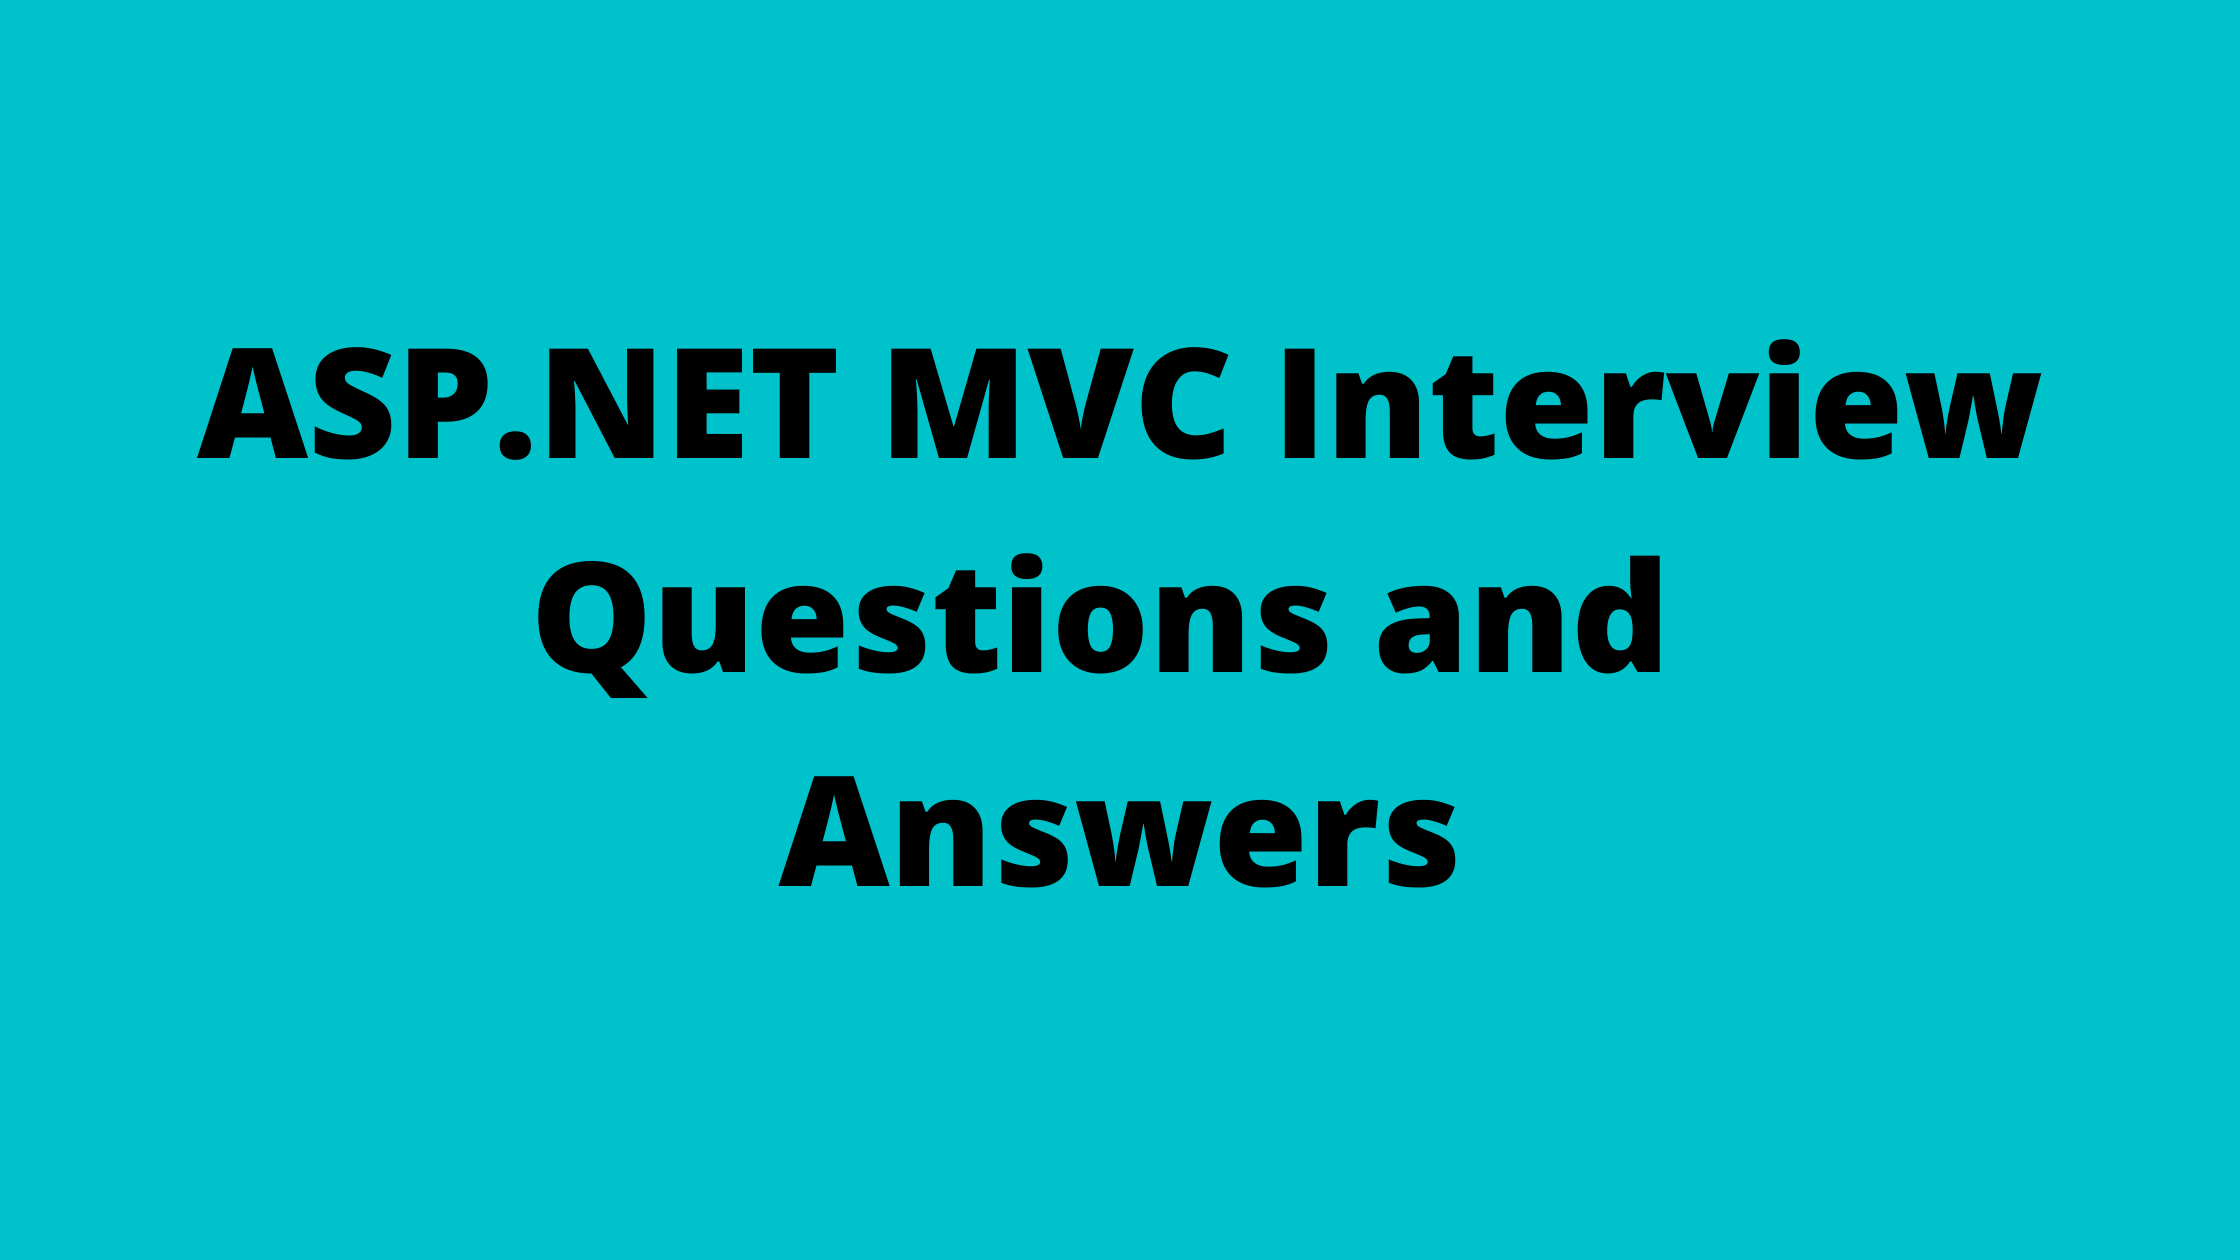 ASP.NET MVC Interview Questions and Answers